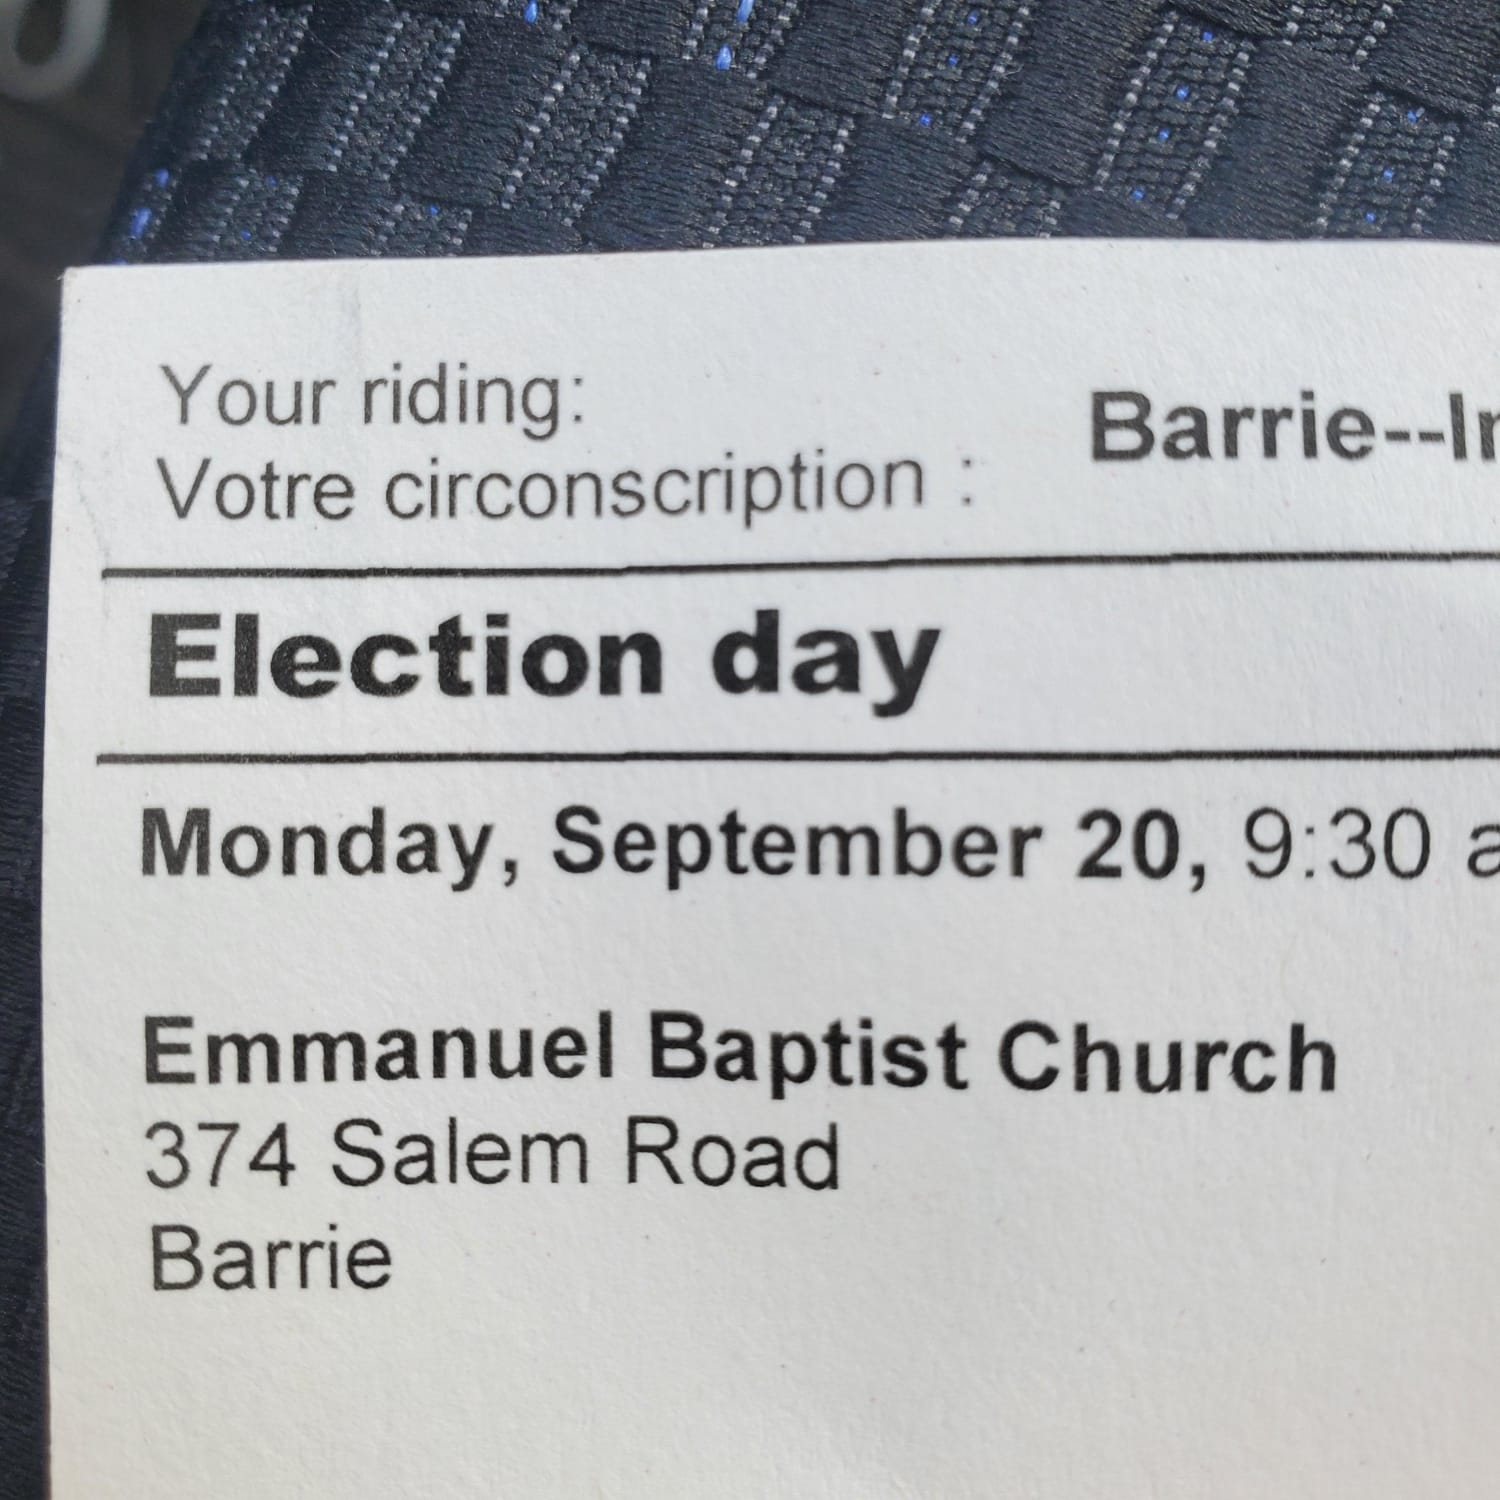 Heading out to vote, just noticed that my voting station is in a Baptist church on Salem Rd...what could possibly go wrong? 🤷‍♂️🔮lol (Canada)